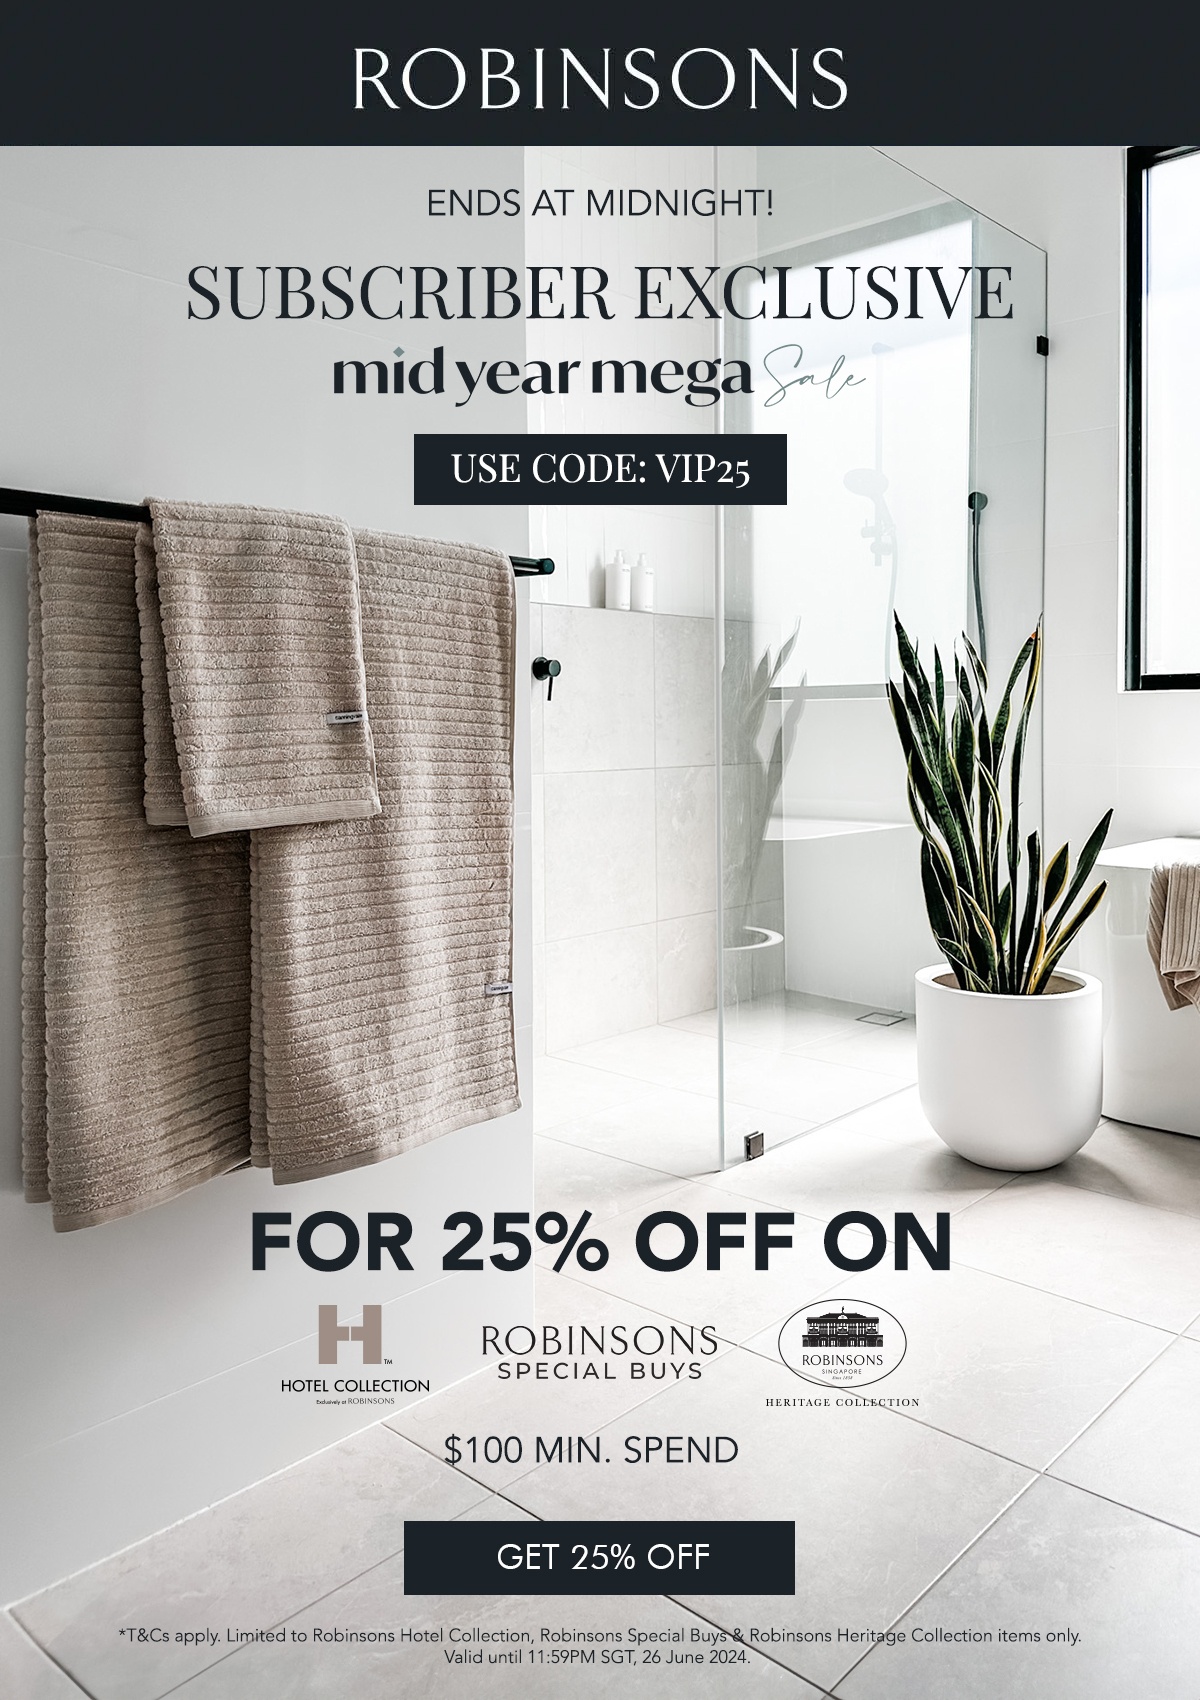 Robinsons Subscriber Exclusive